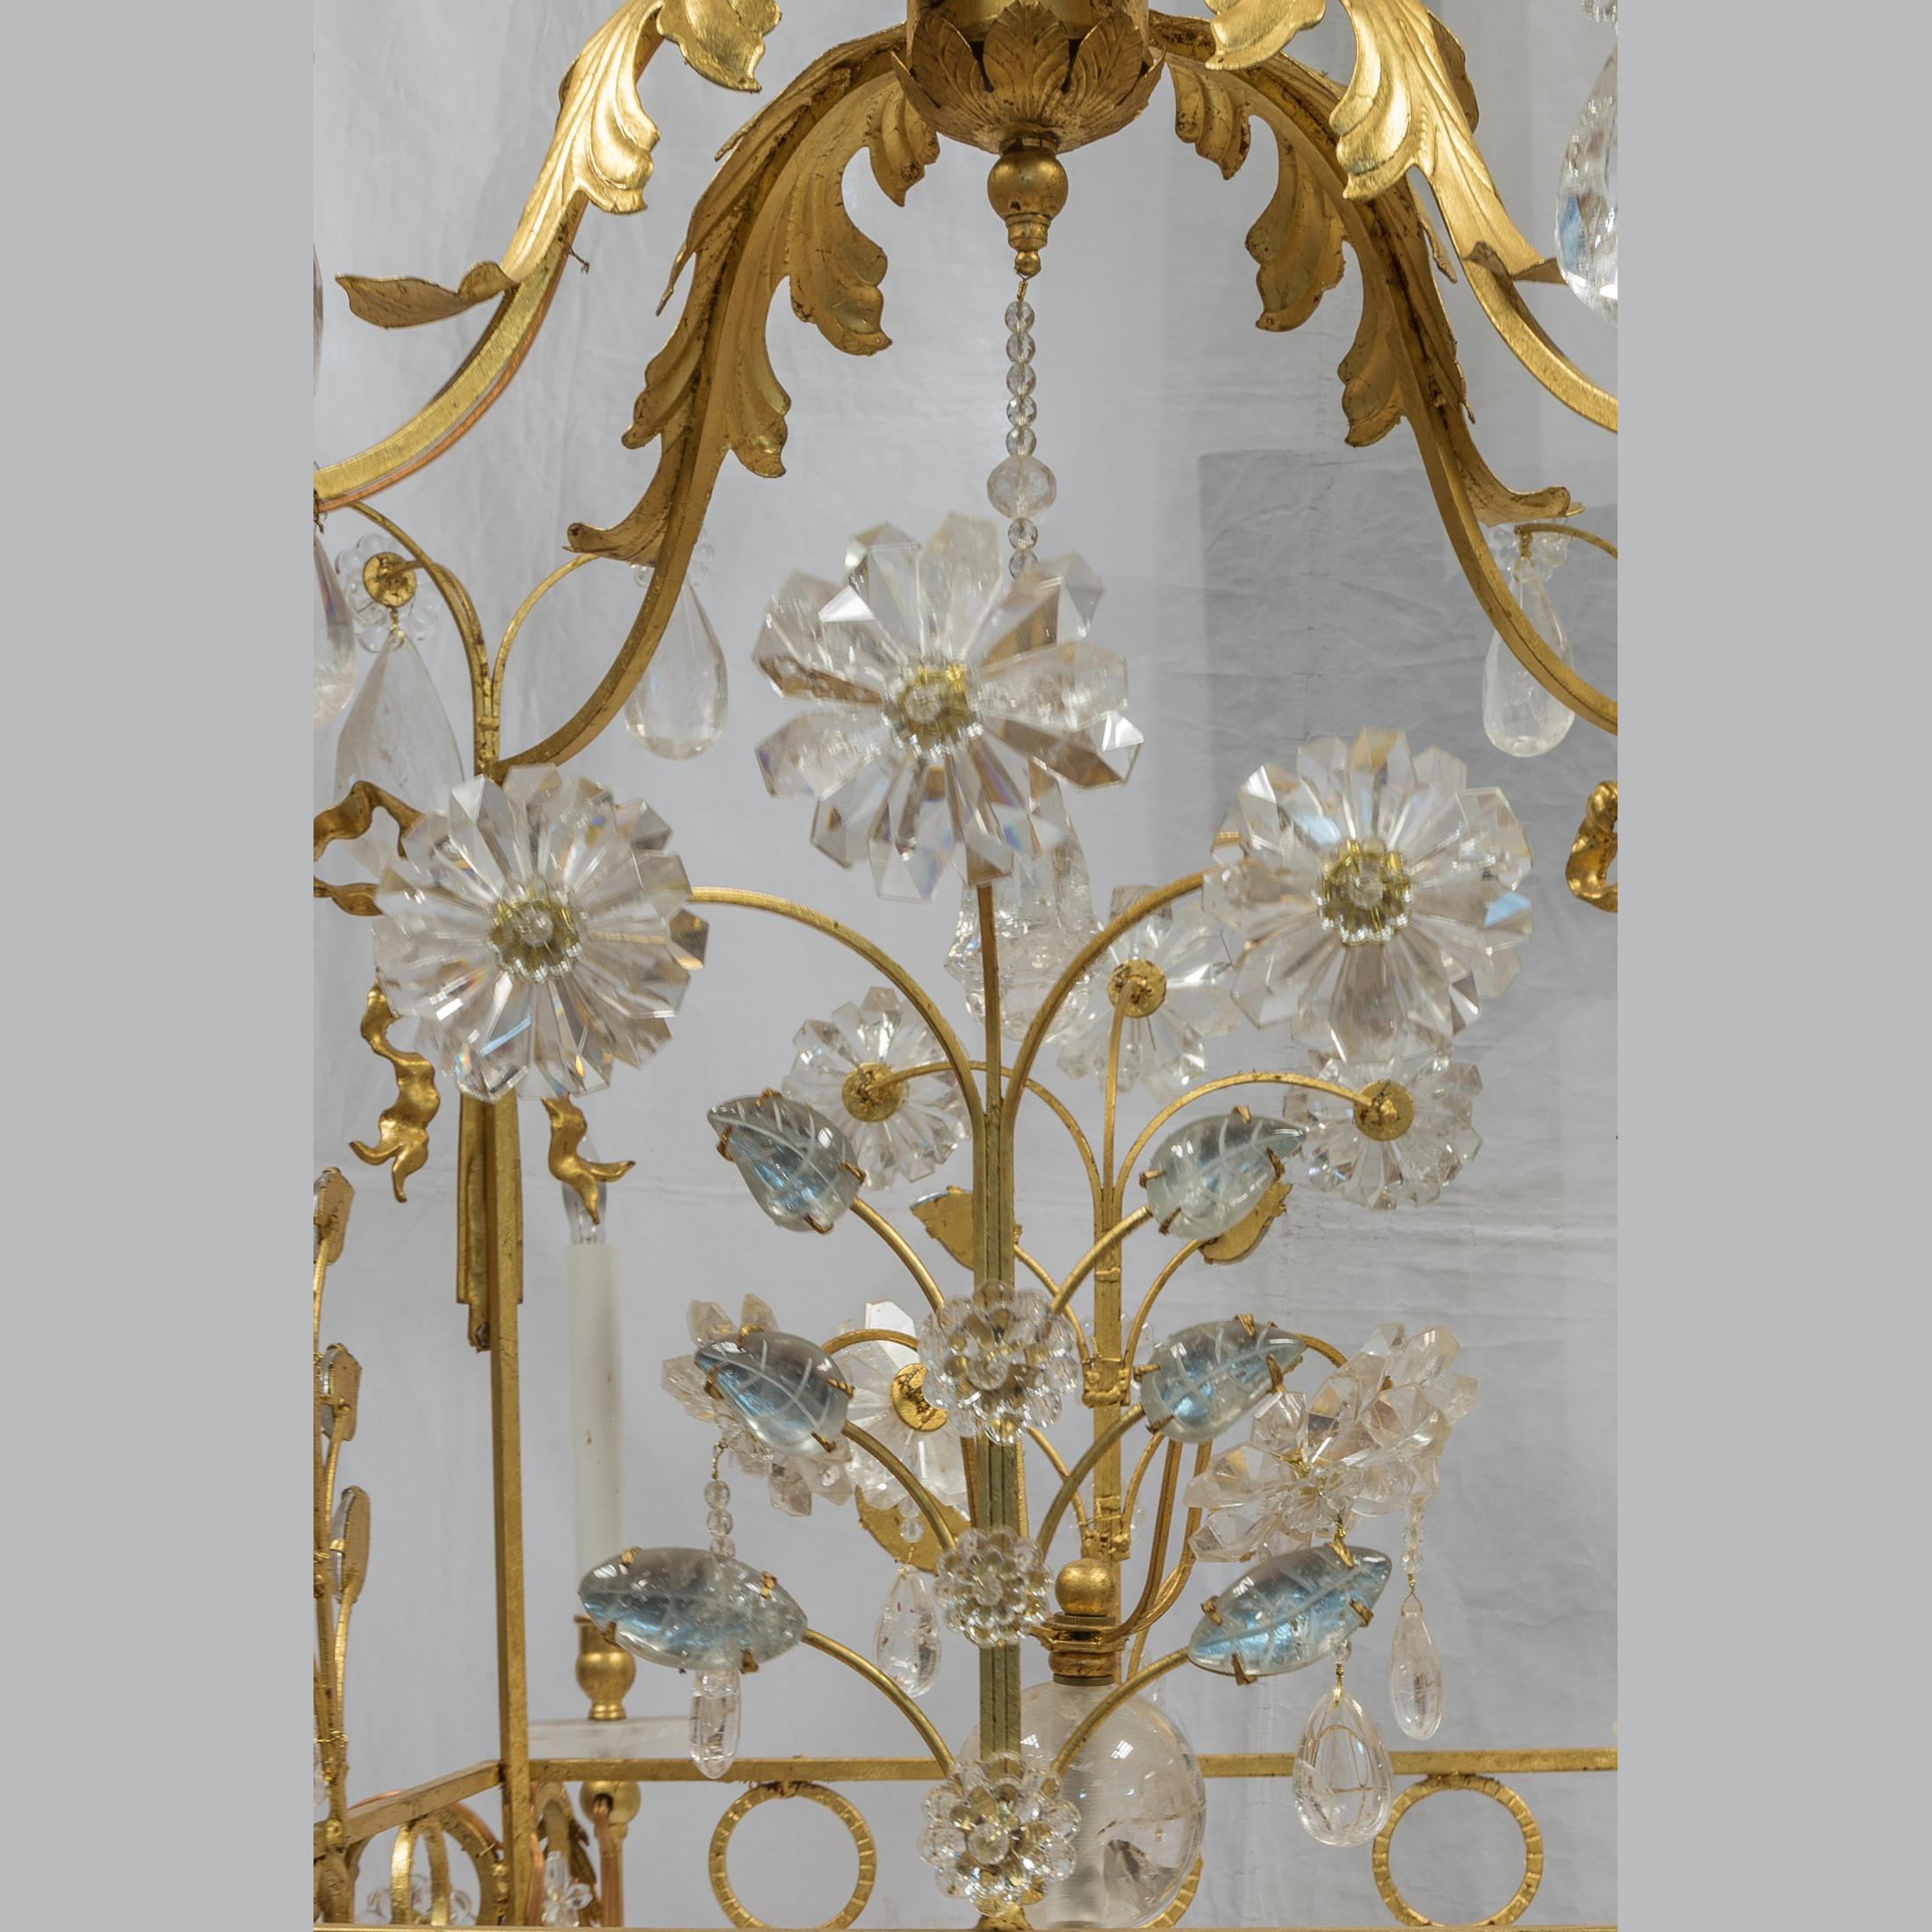 20th Century charming gilt-metal and rock crystal cage-formed eight-light chandelier mounted with multifaceted hand carved rock crystal center column and profusely mounted with rock crystal elements and drops on branches. Gilded bronze foliage and